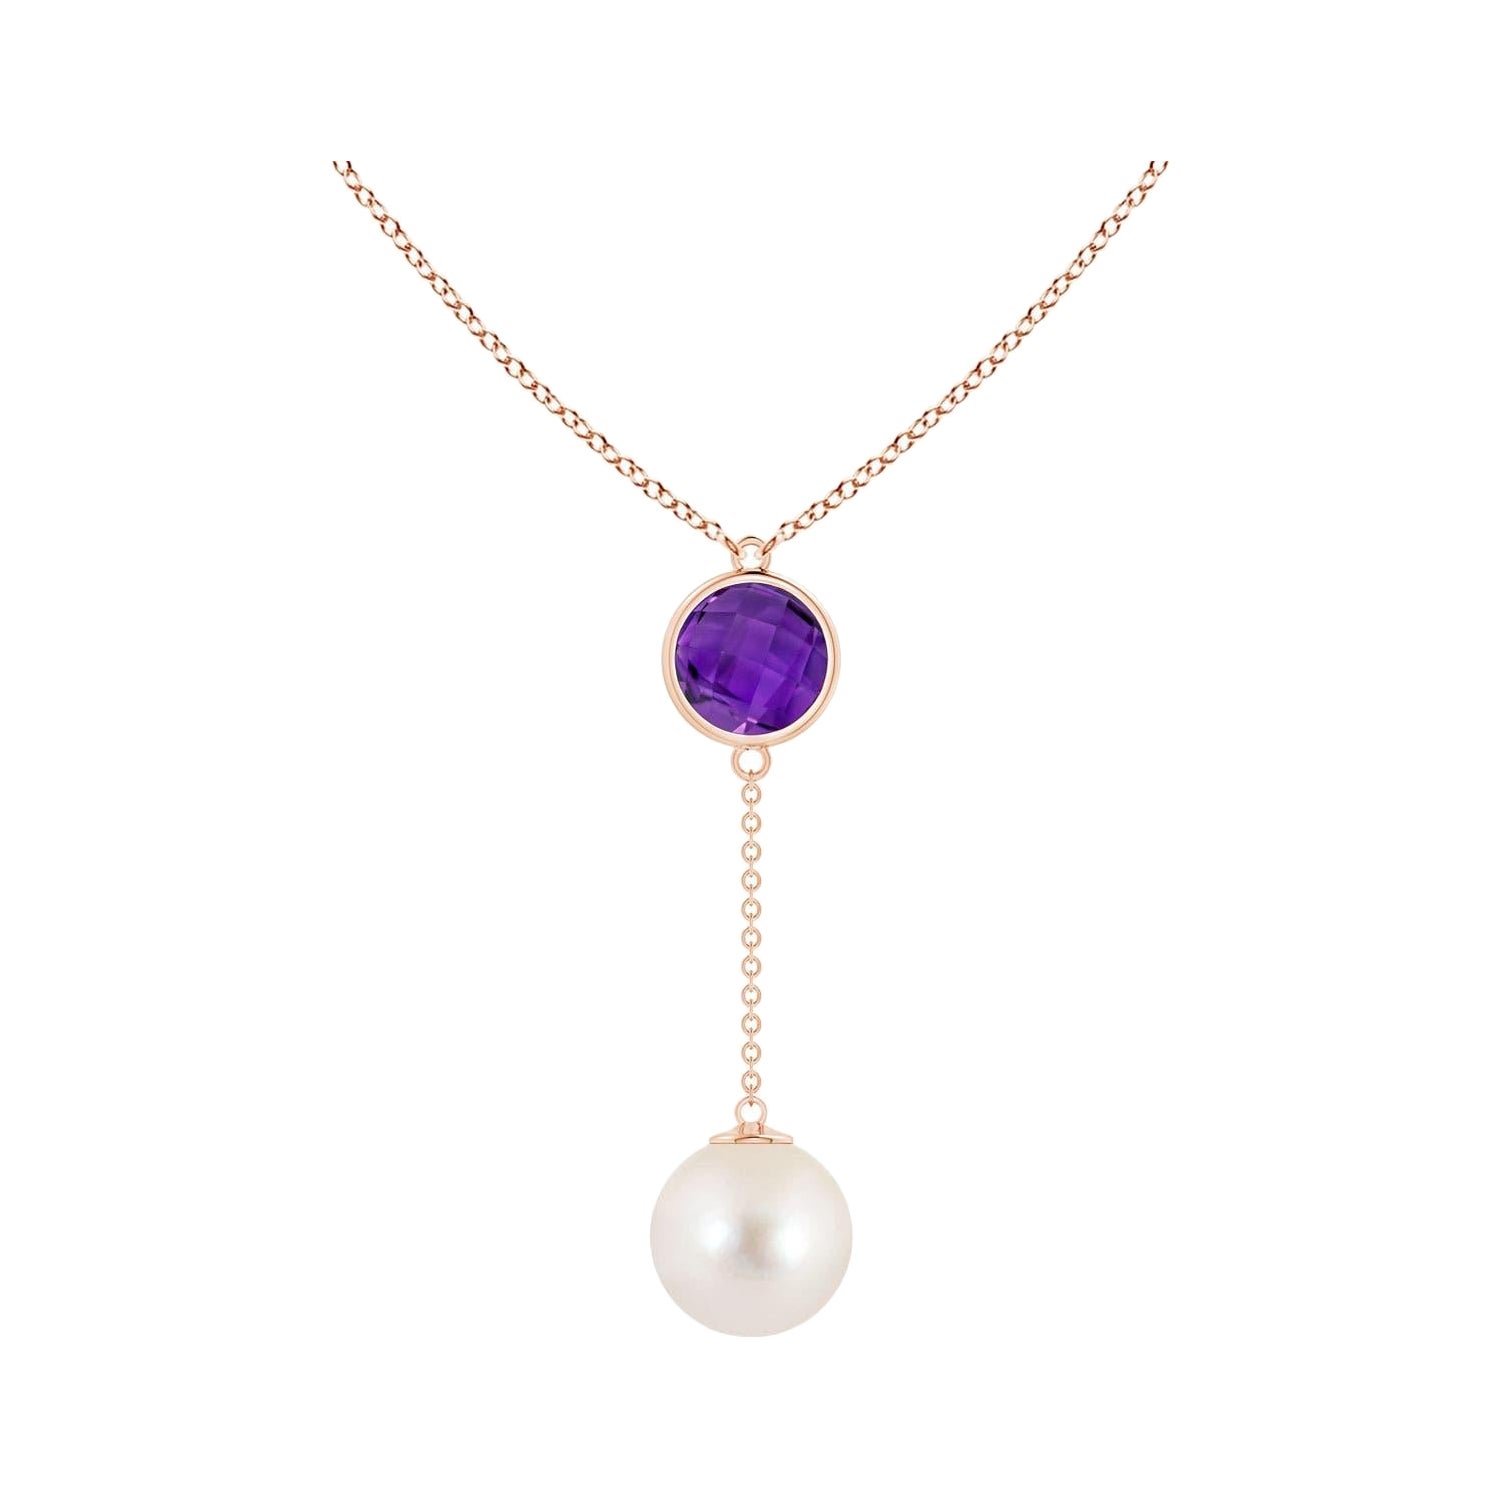 Freshwater Cultured Pearl & 1.65ct Amethyst Lariat Necklace in 14K Rose Gold